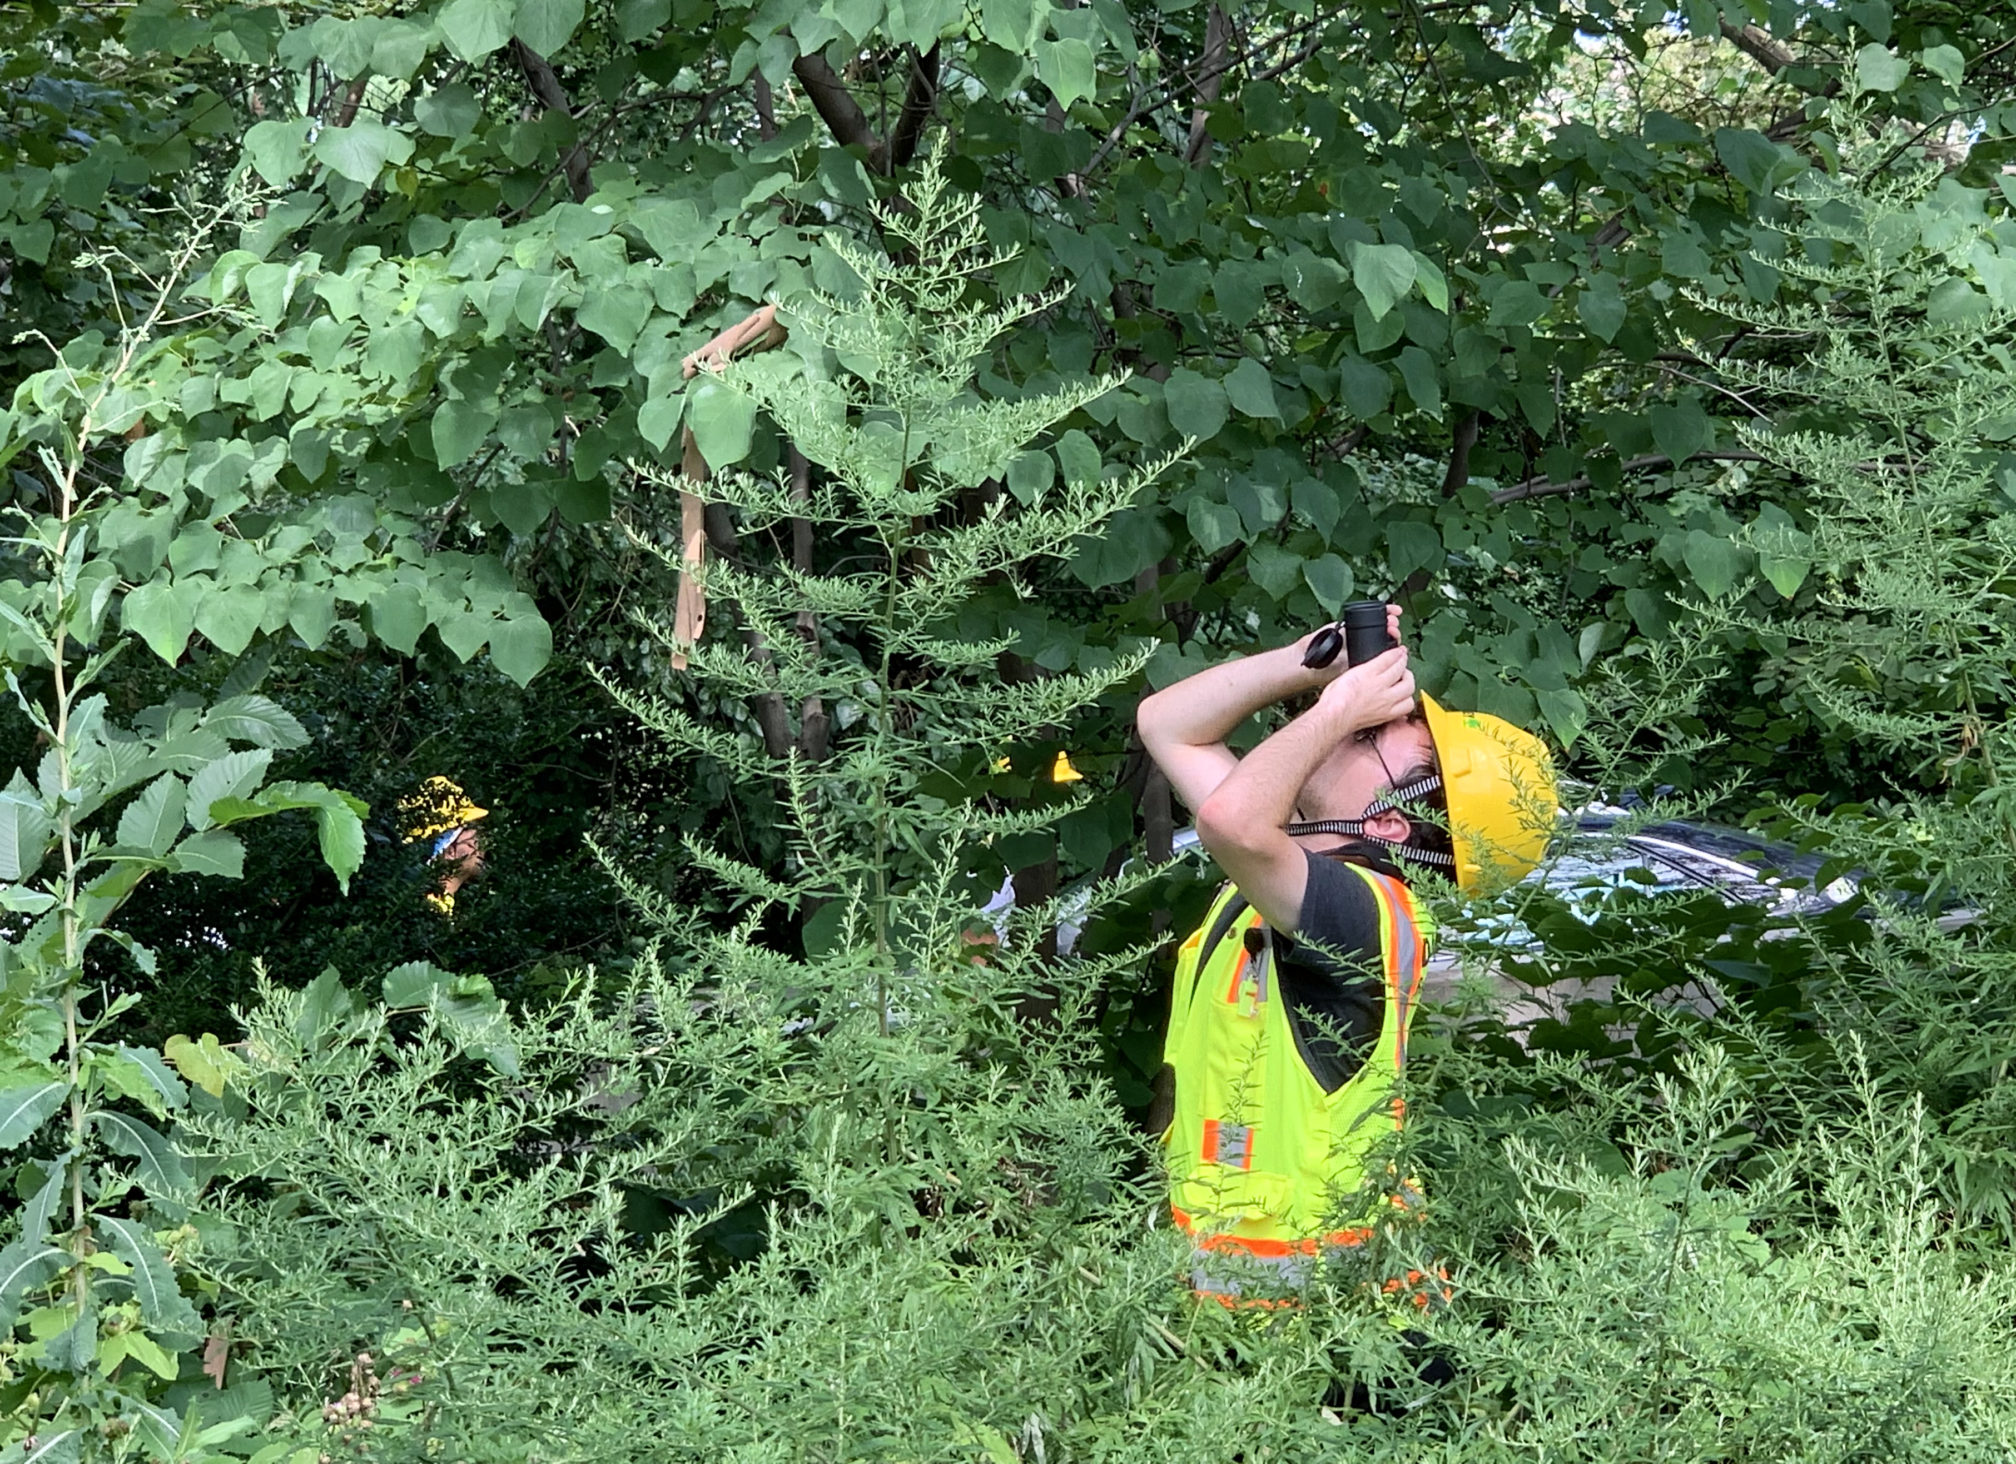 Specialists hired by USDA inspected trees in Cadman Plaza Park in Downtown Brooklyn on Thursday for Asian longhorned beetle infestation. If a tree is infested, it needs to be chopped down and removed. Eagle photo by Mary Frost